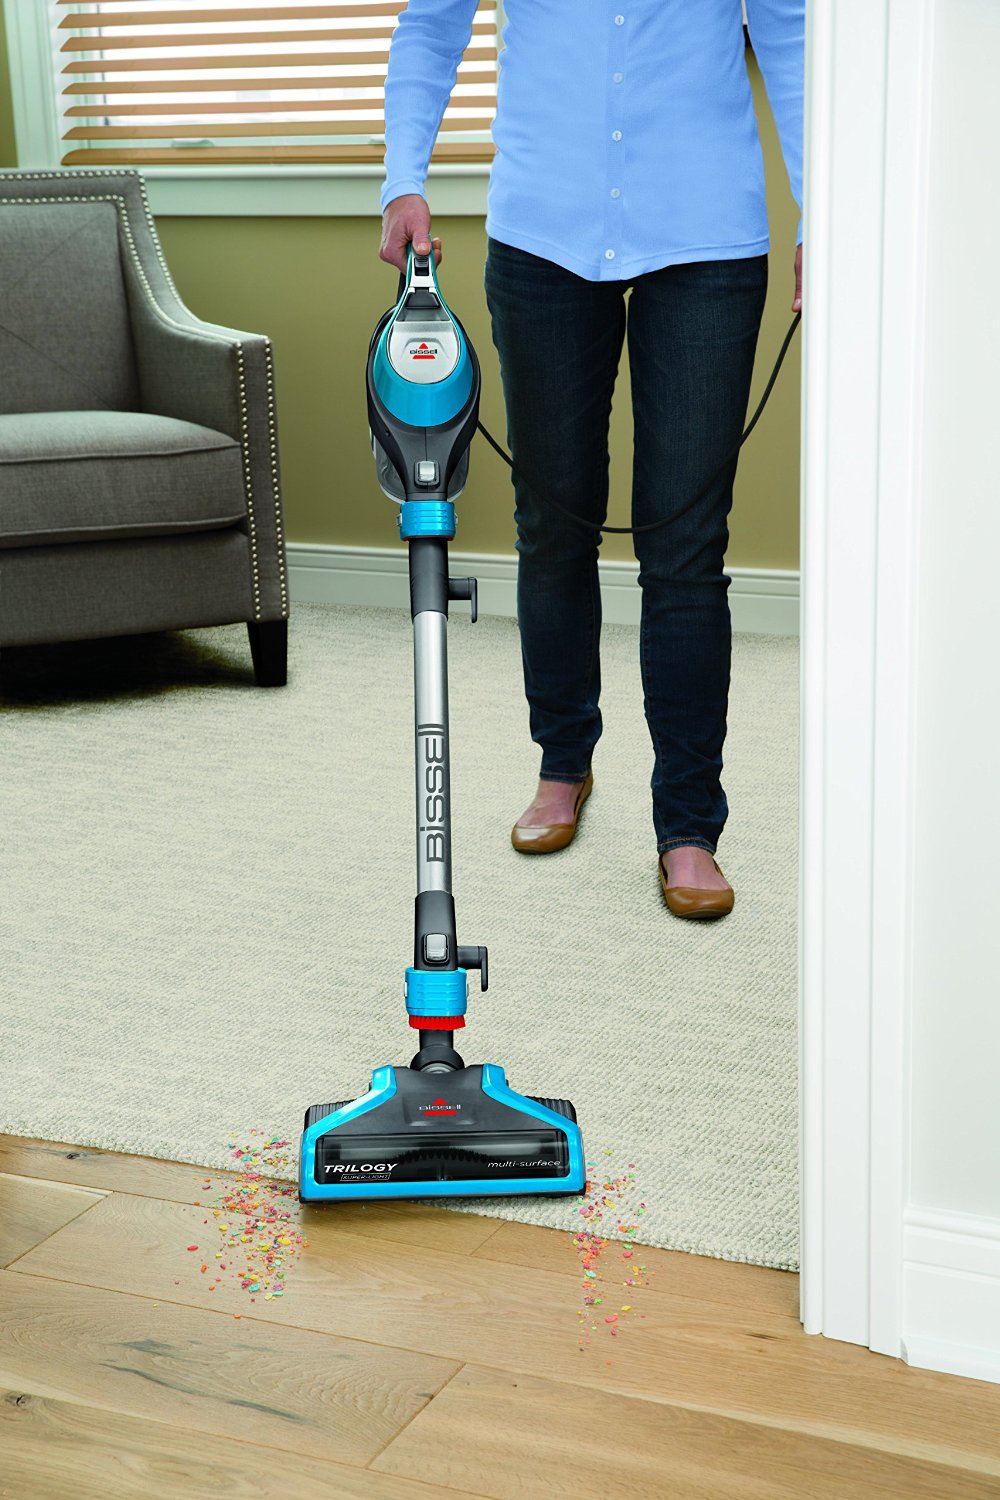 Buy bissell 1683 - Online store for vacuums & floor equipment, stick in USA, on sale, low price, discount deals, coupon code